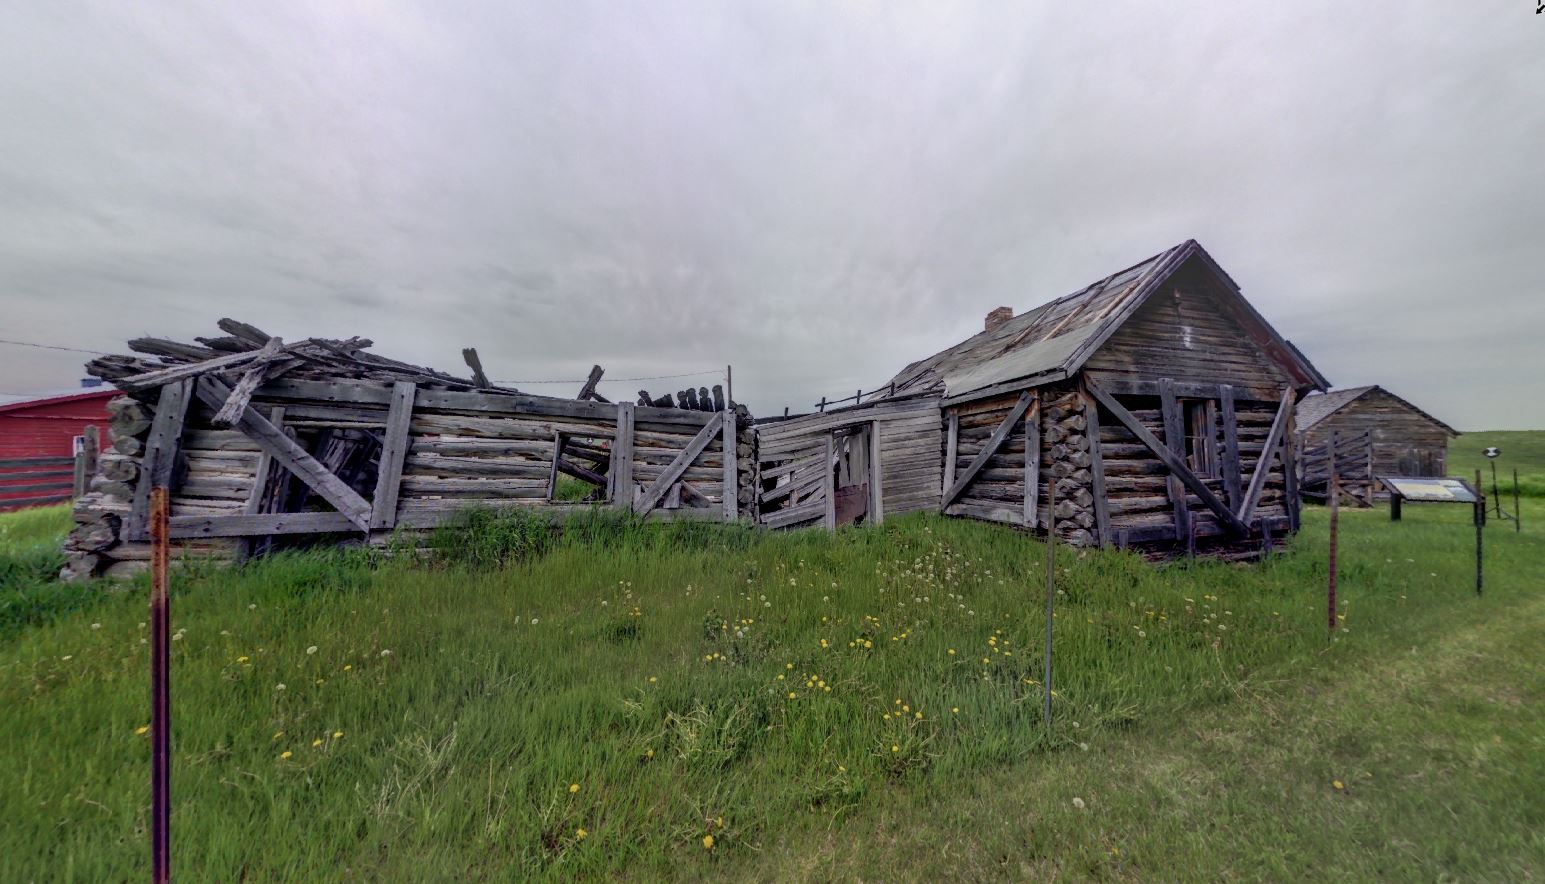 Panoramic view from scanning location 2 on the southern face of the log cabin, Perrenoud Homestead, July 2017.